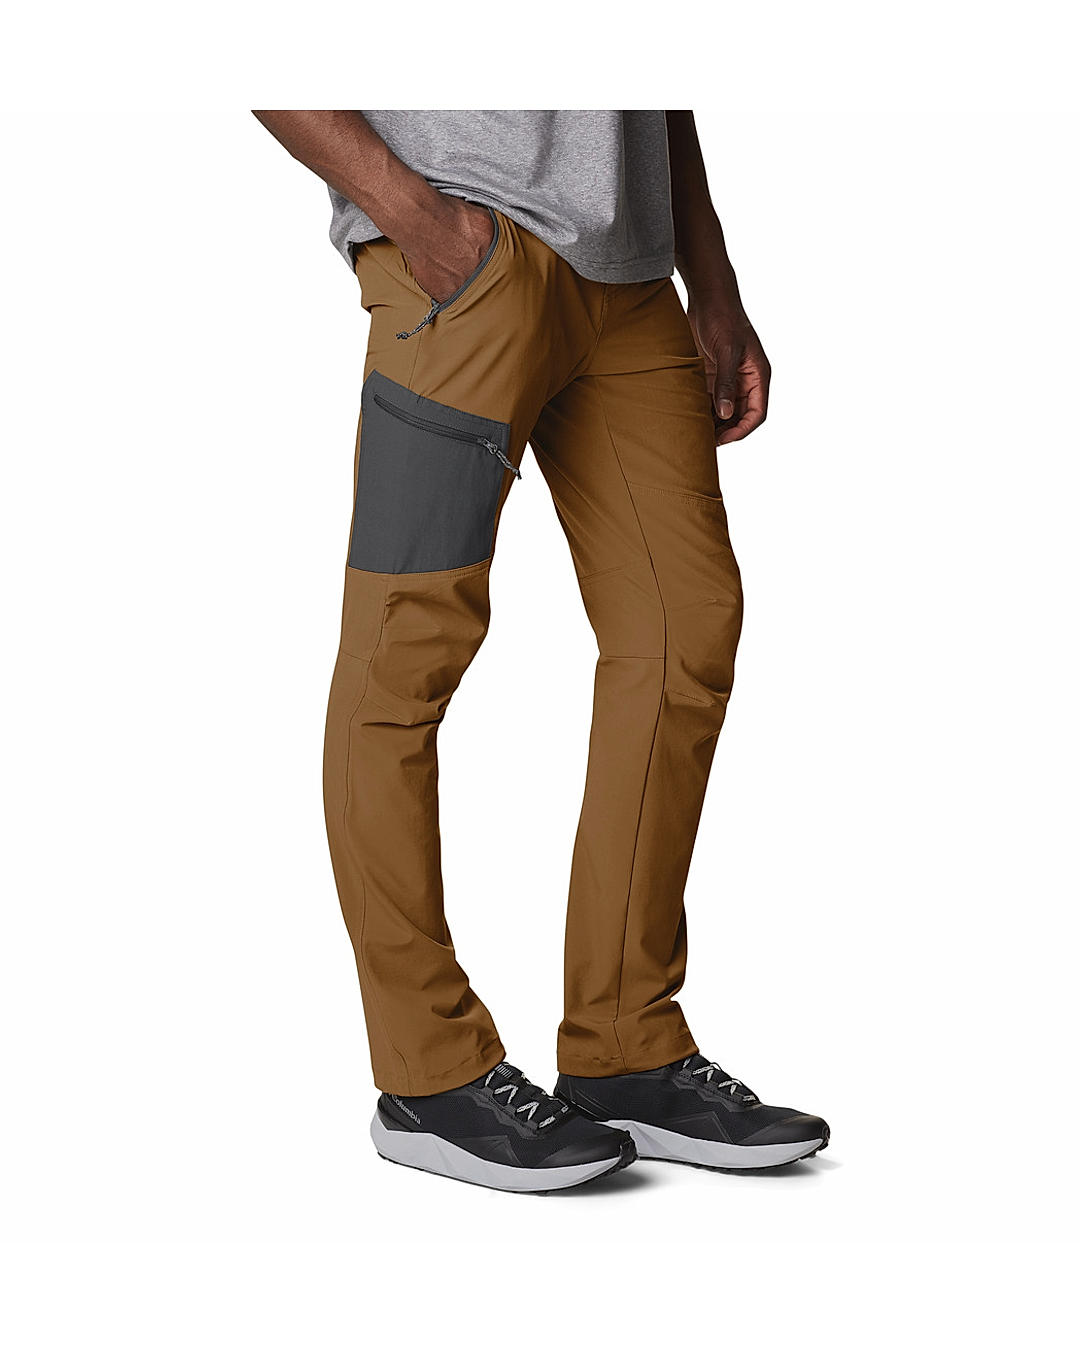 Buy Triple Canyon Pant for Men and Women For Men Online at Adventuras